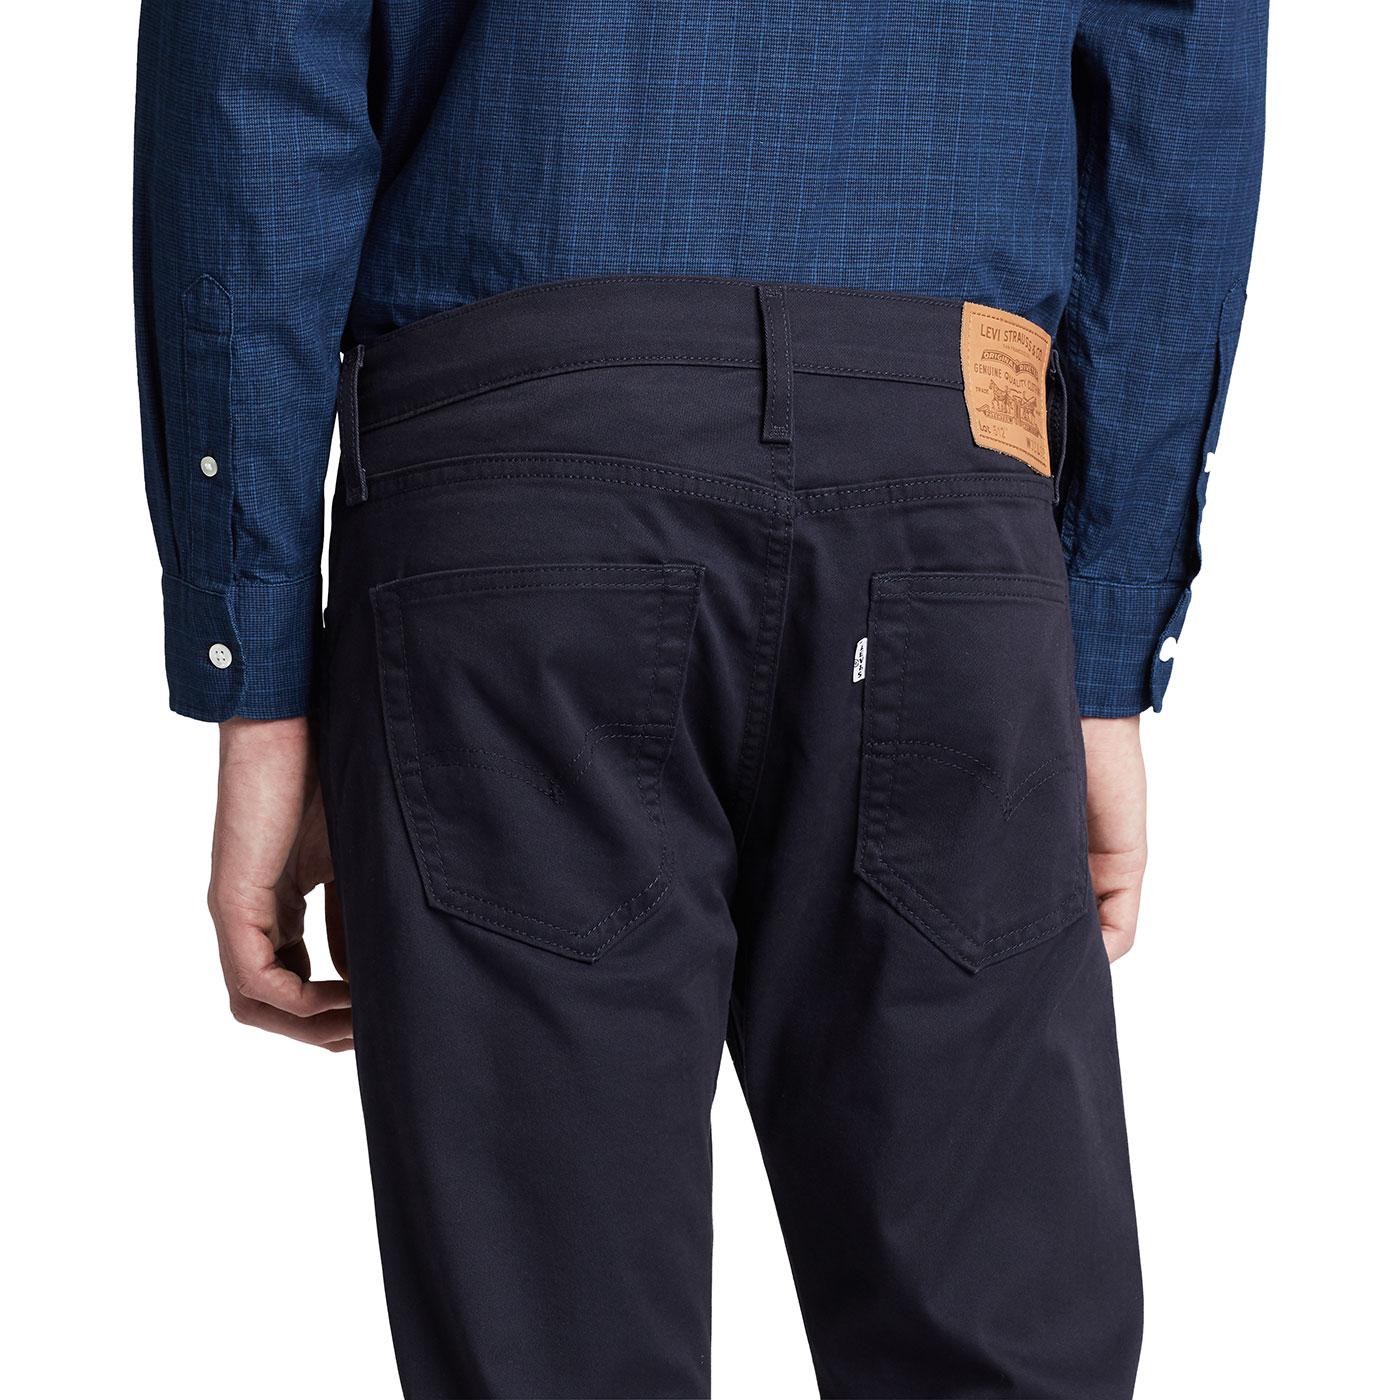 Levis 512 Chinos Outlet, SAVE 50% 